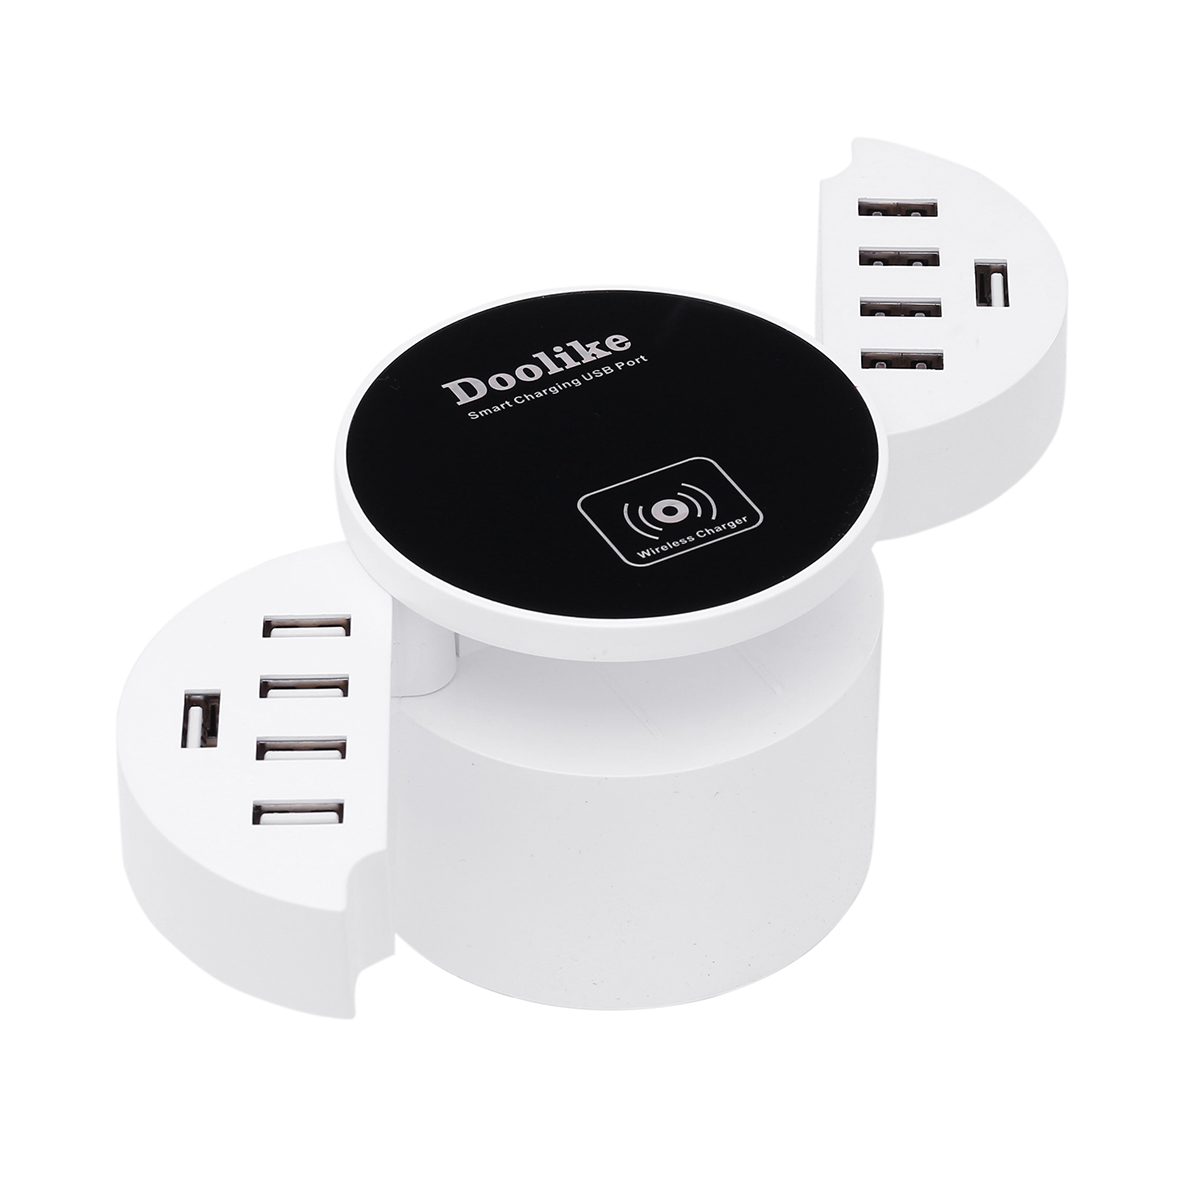 

Bakeey DL-CDA 16W 10Ports USB Charger With Wireless Charger For iPhone X 8/8Plus Samsung S8 m